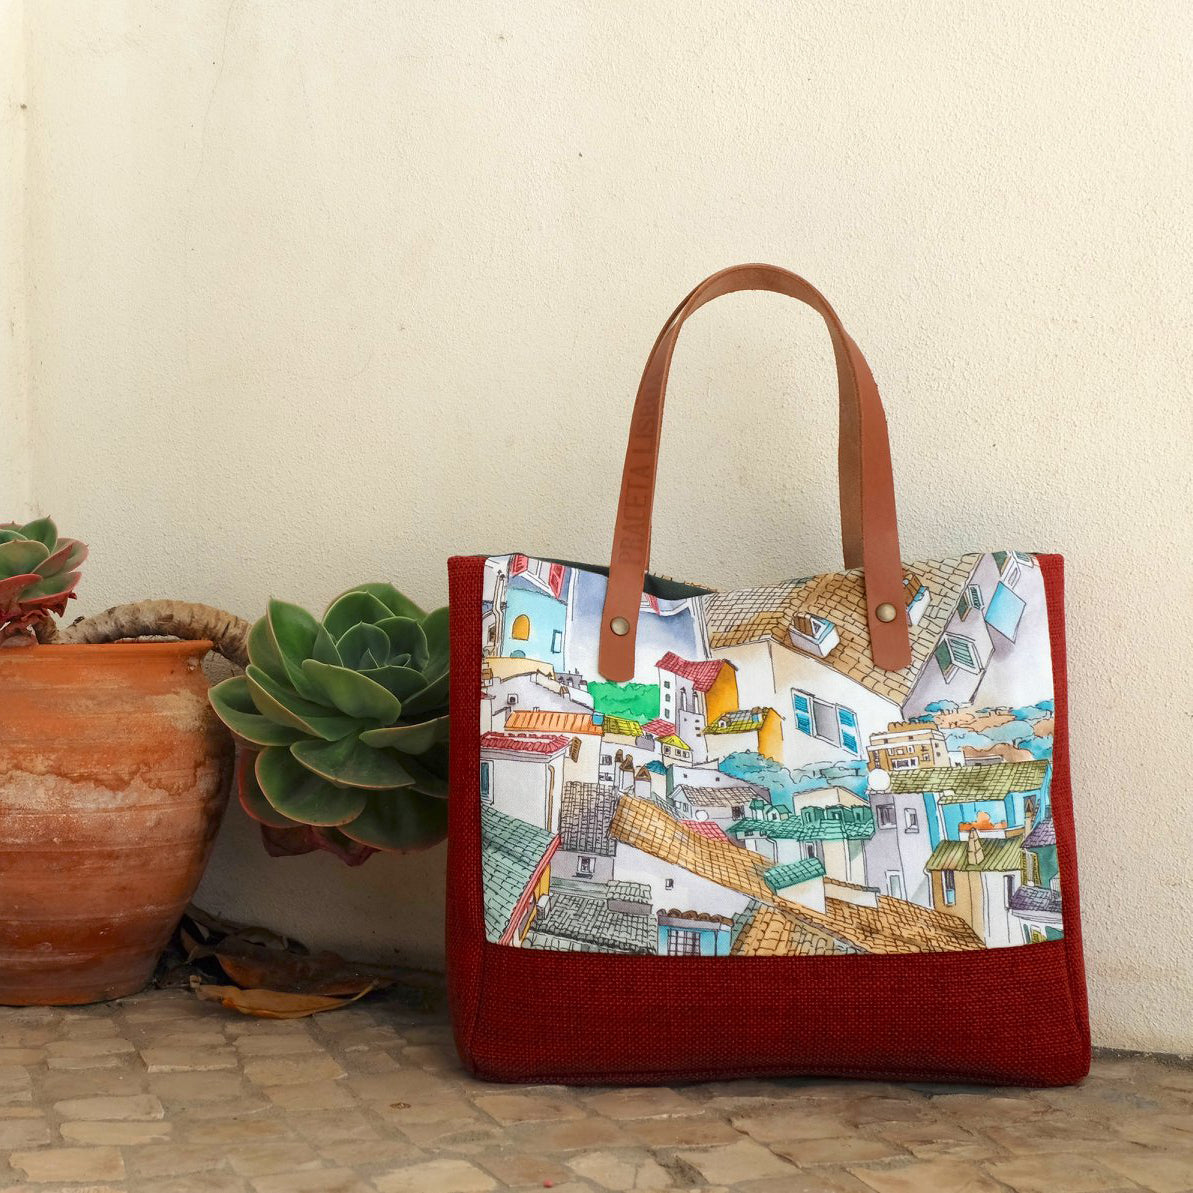 Handmade and sustainable purses for women made in Portugal by the most skilful artisans.  